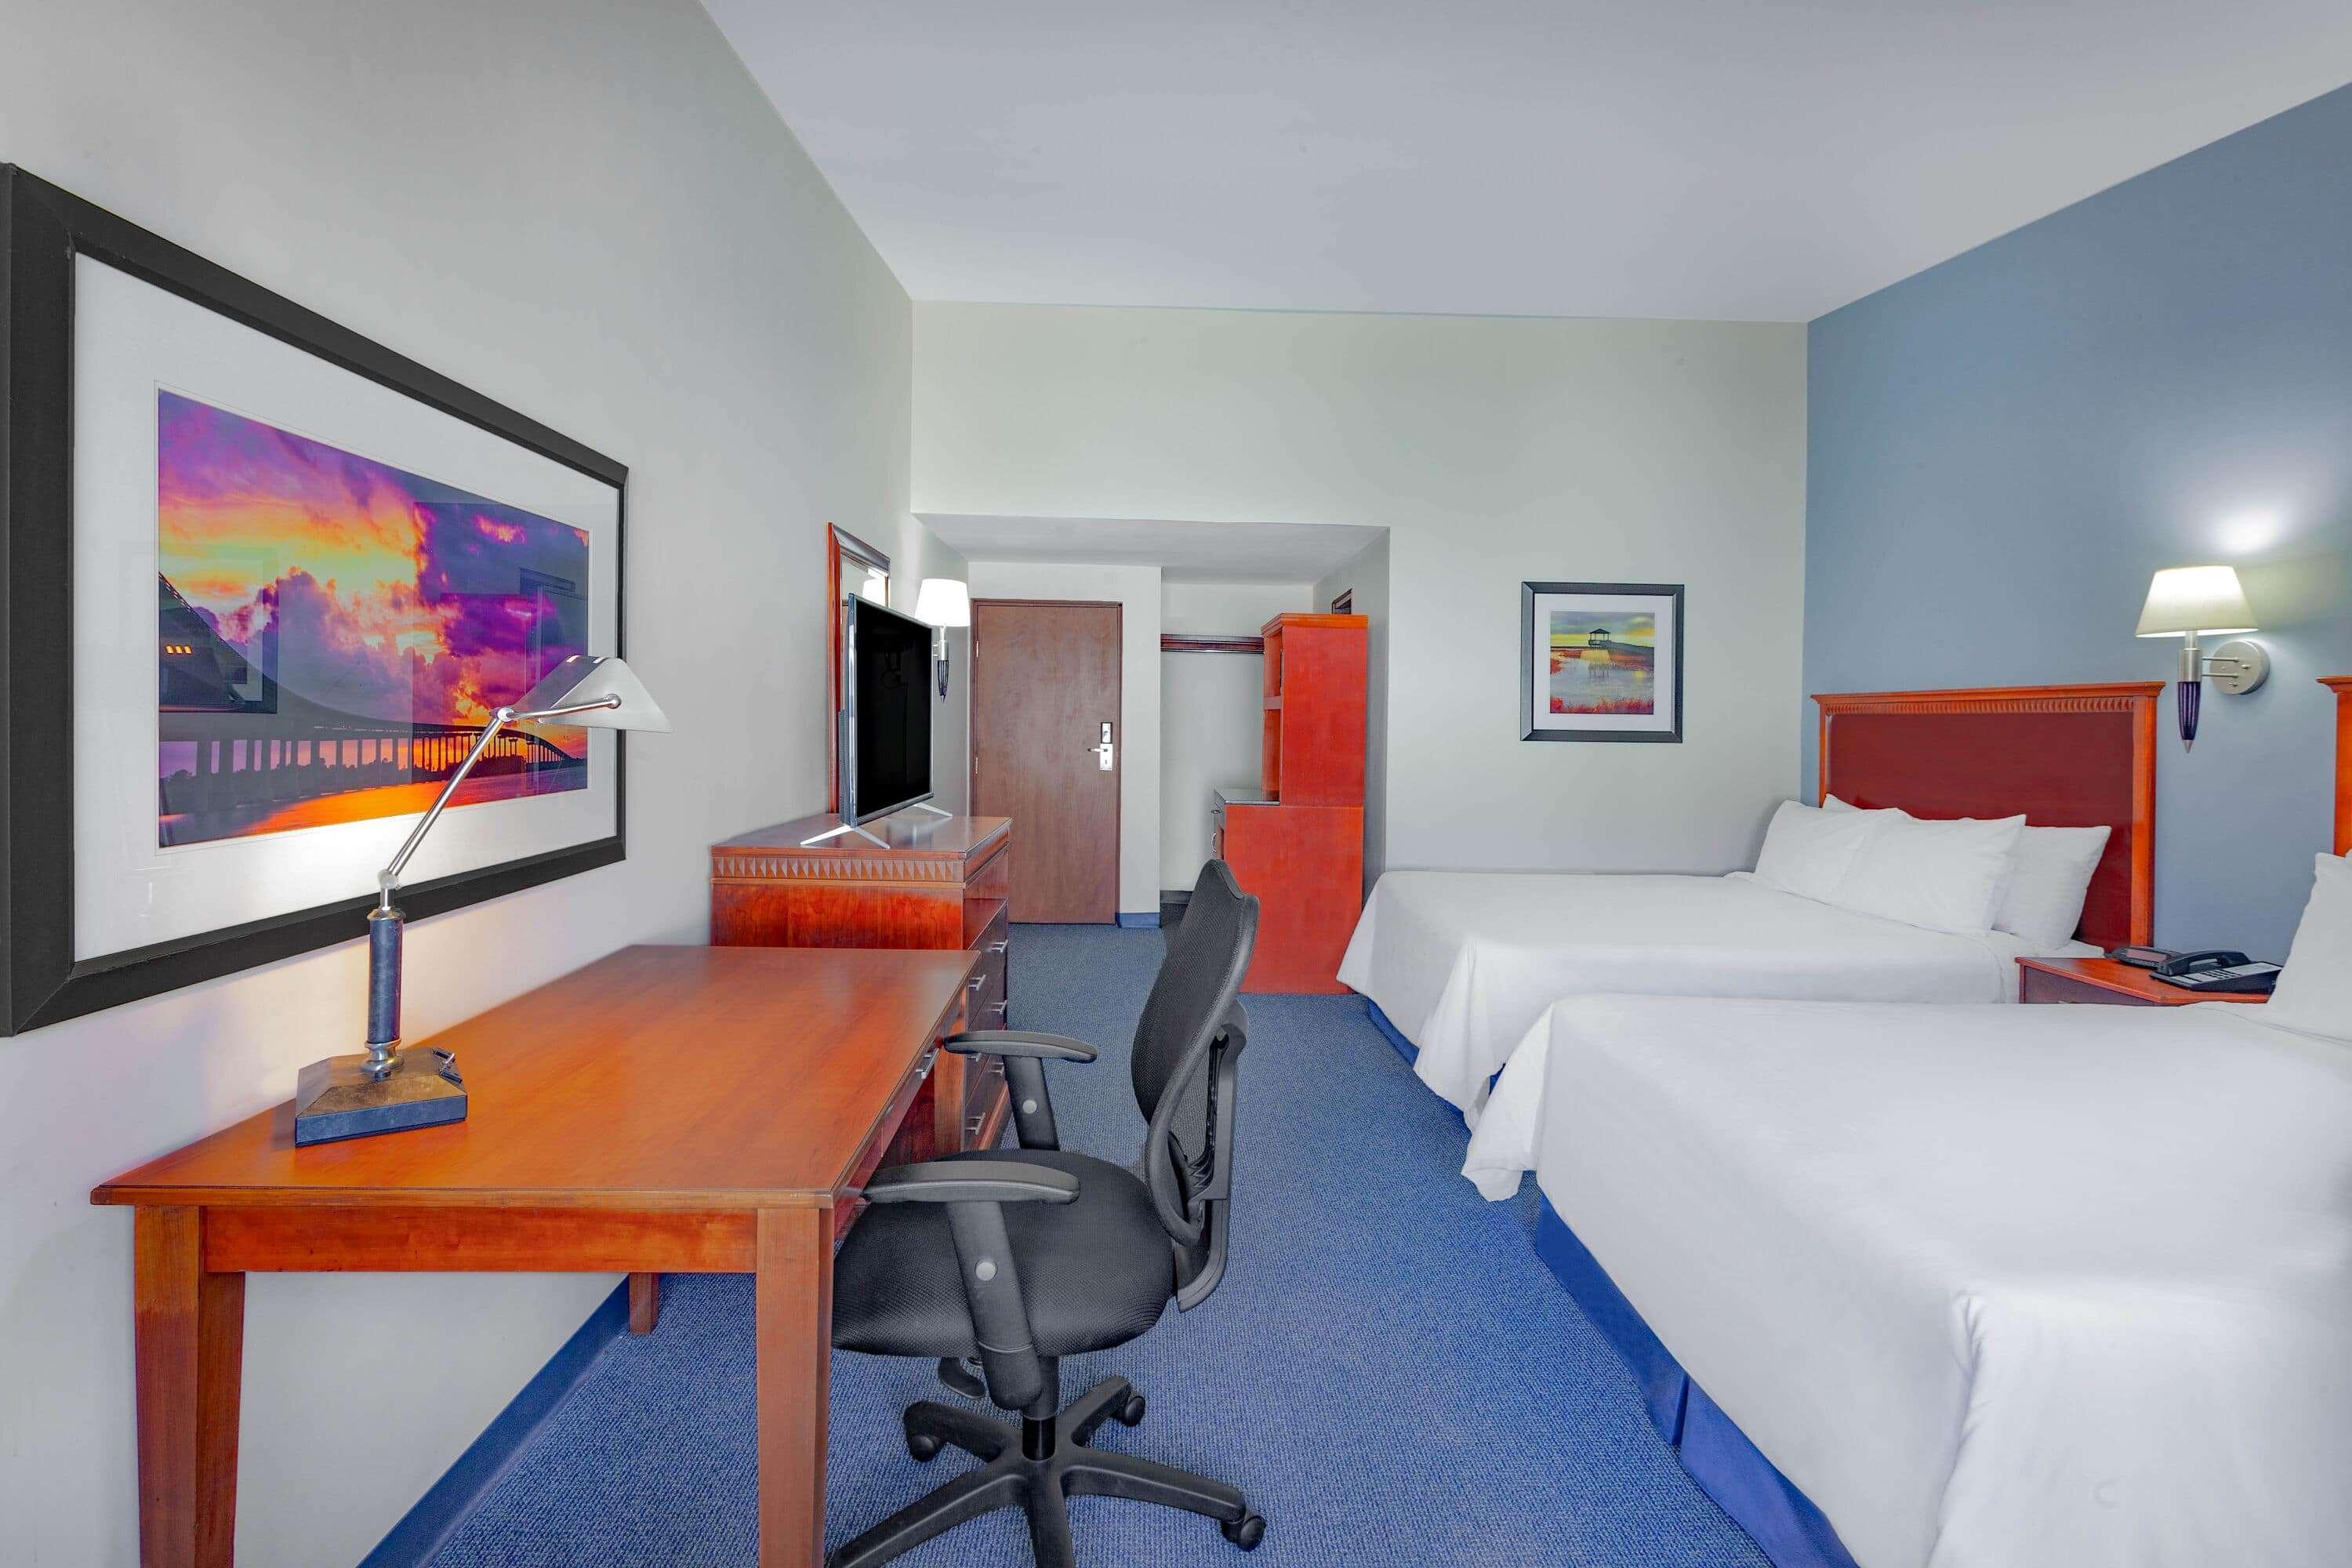 HOTEL DAYS INN BY WYNDHAM PIEDRAS NEGRAS 3* (Mexico) - from US$ 98 | BOOKED